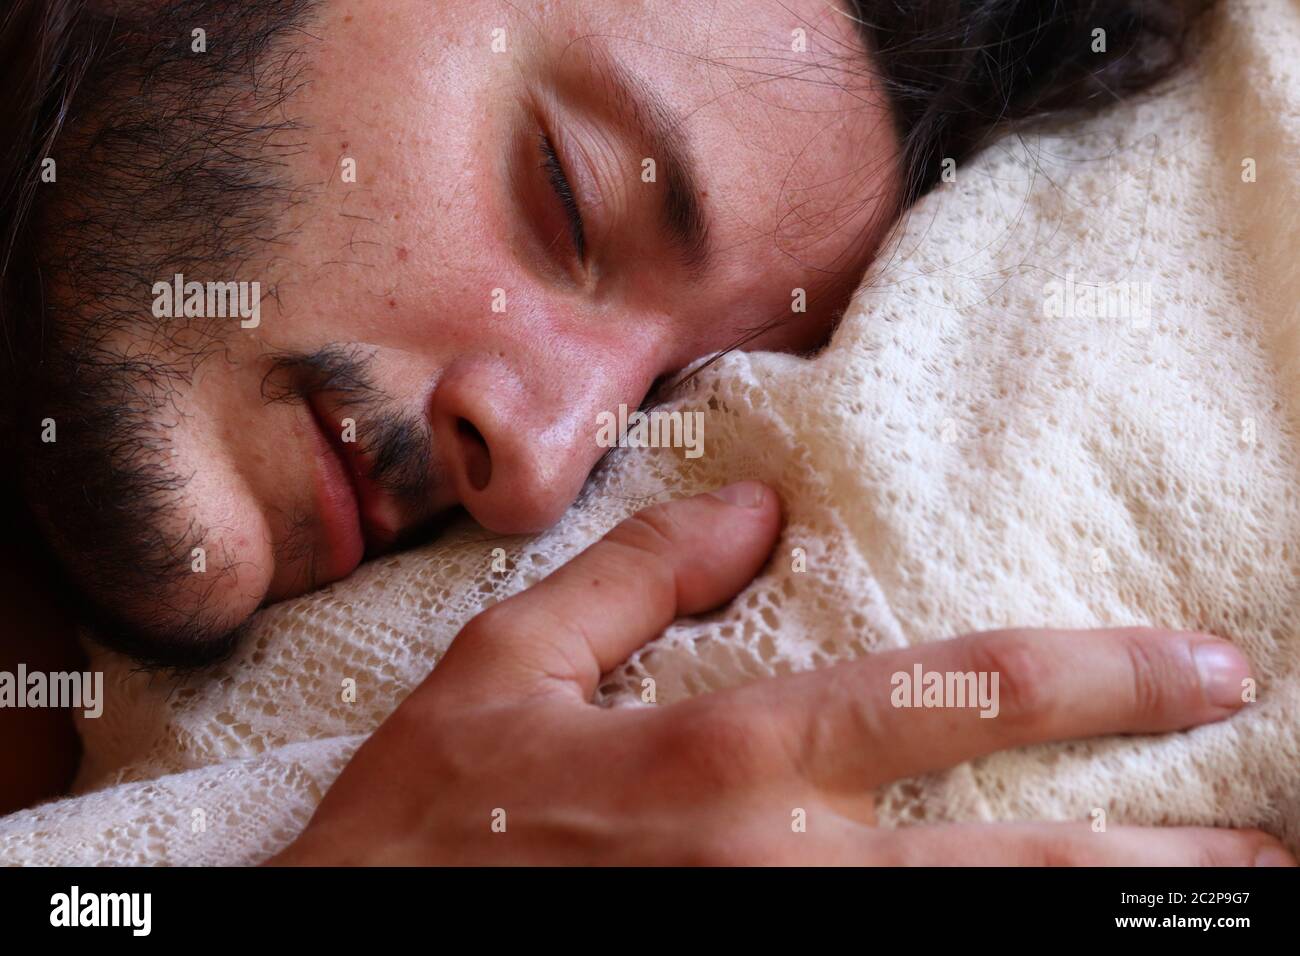 Caucasian man peacefully sleeping showing concept of coping with home quarantine and lock down during the covid-19 pandemic Stock Photo